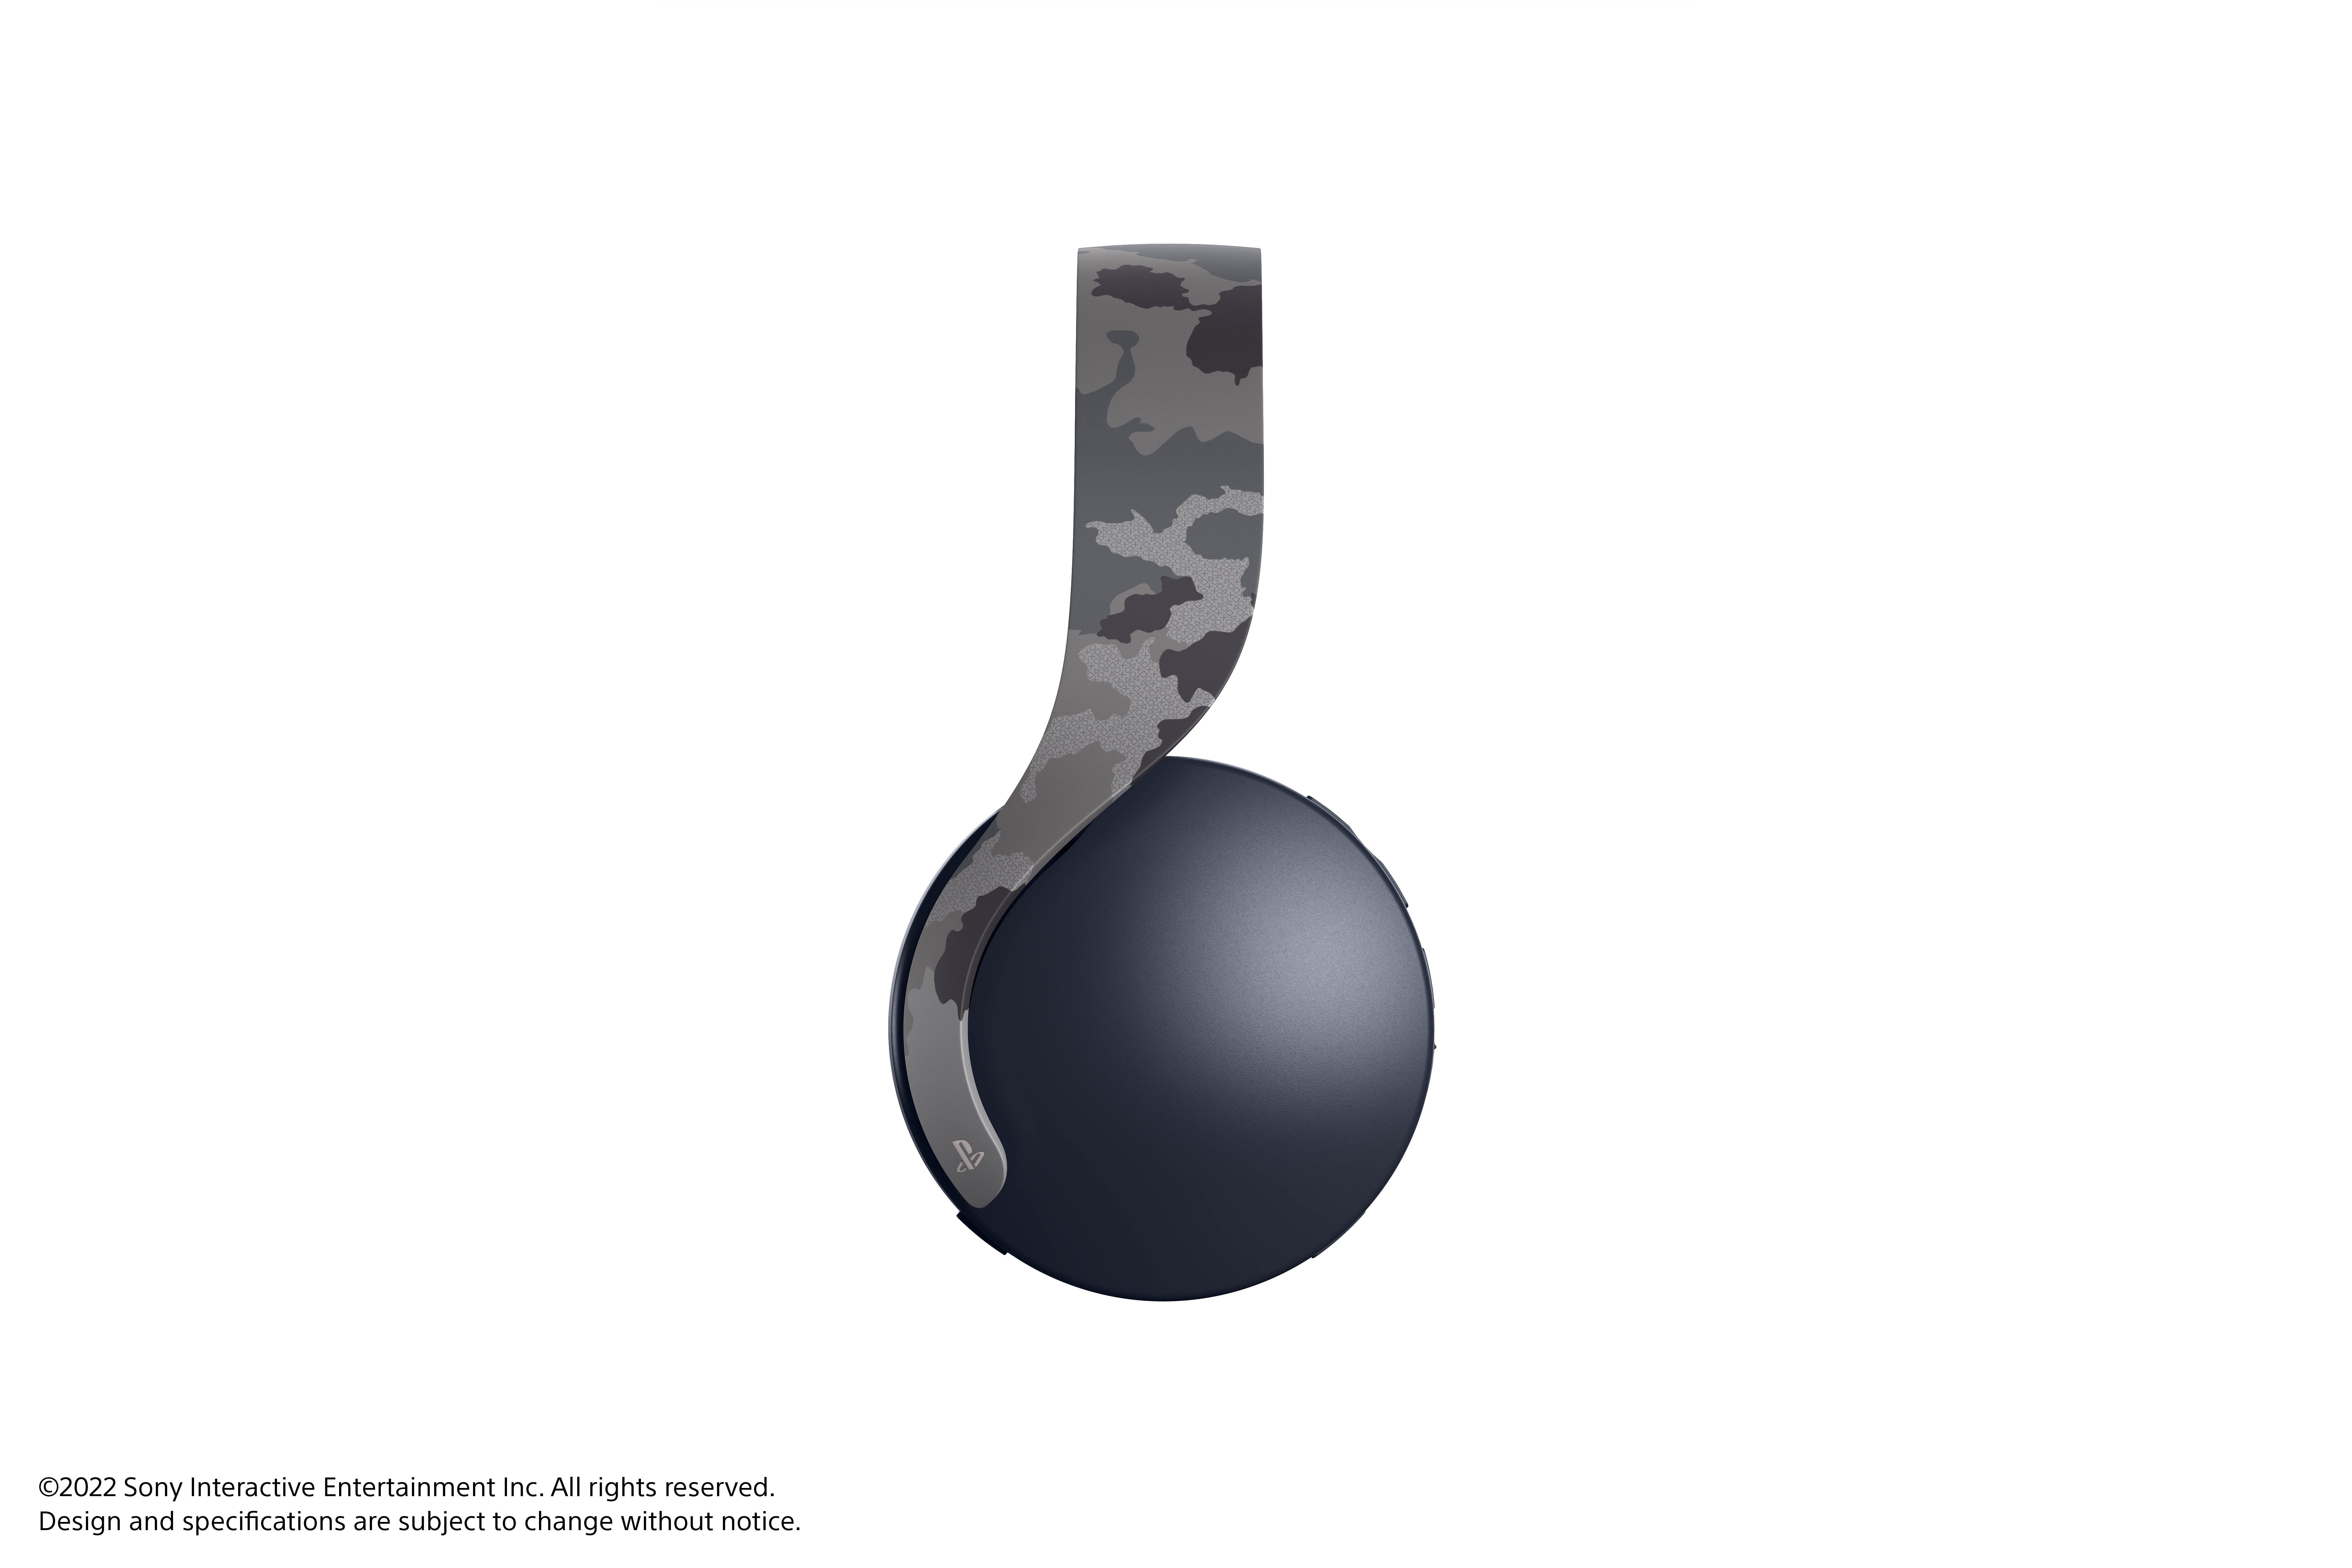 SONY PULSE 3D™, Over-ear Gaming Bluetooth Headset Grau/Camouflage